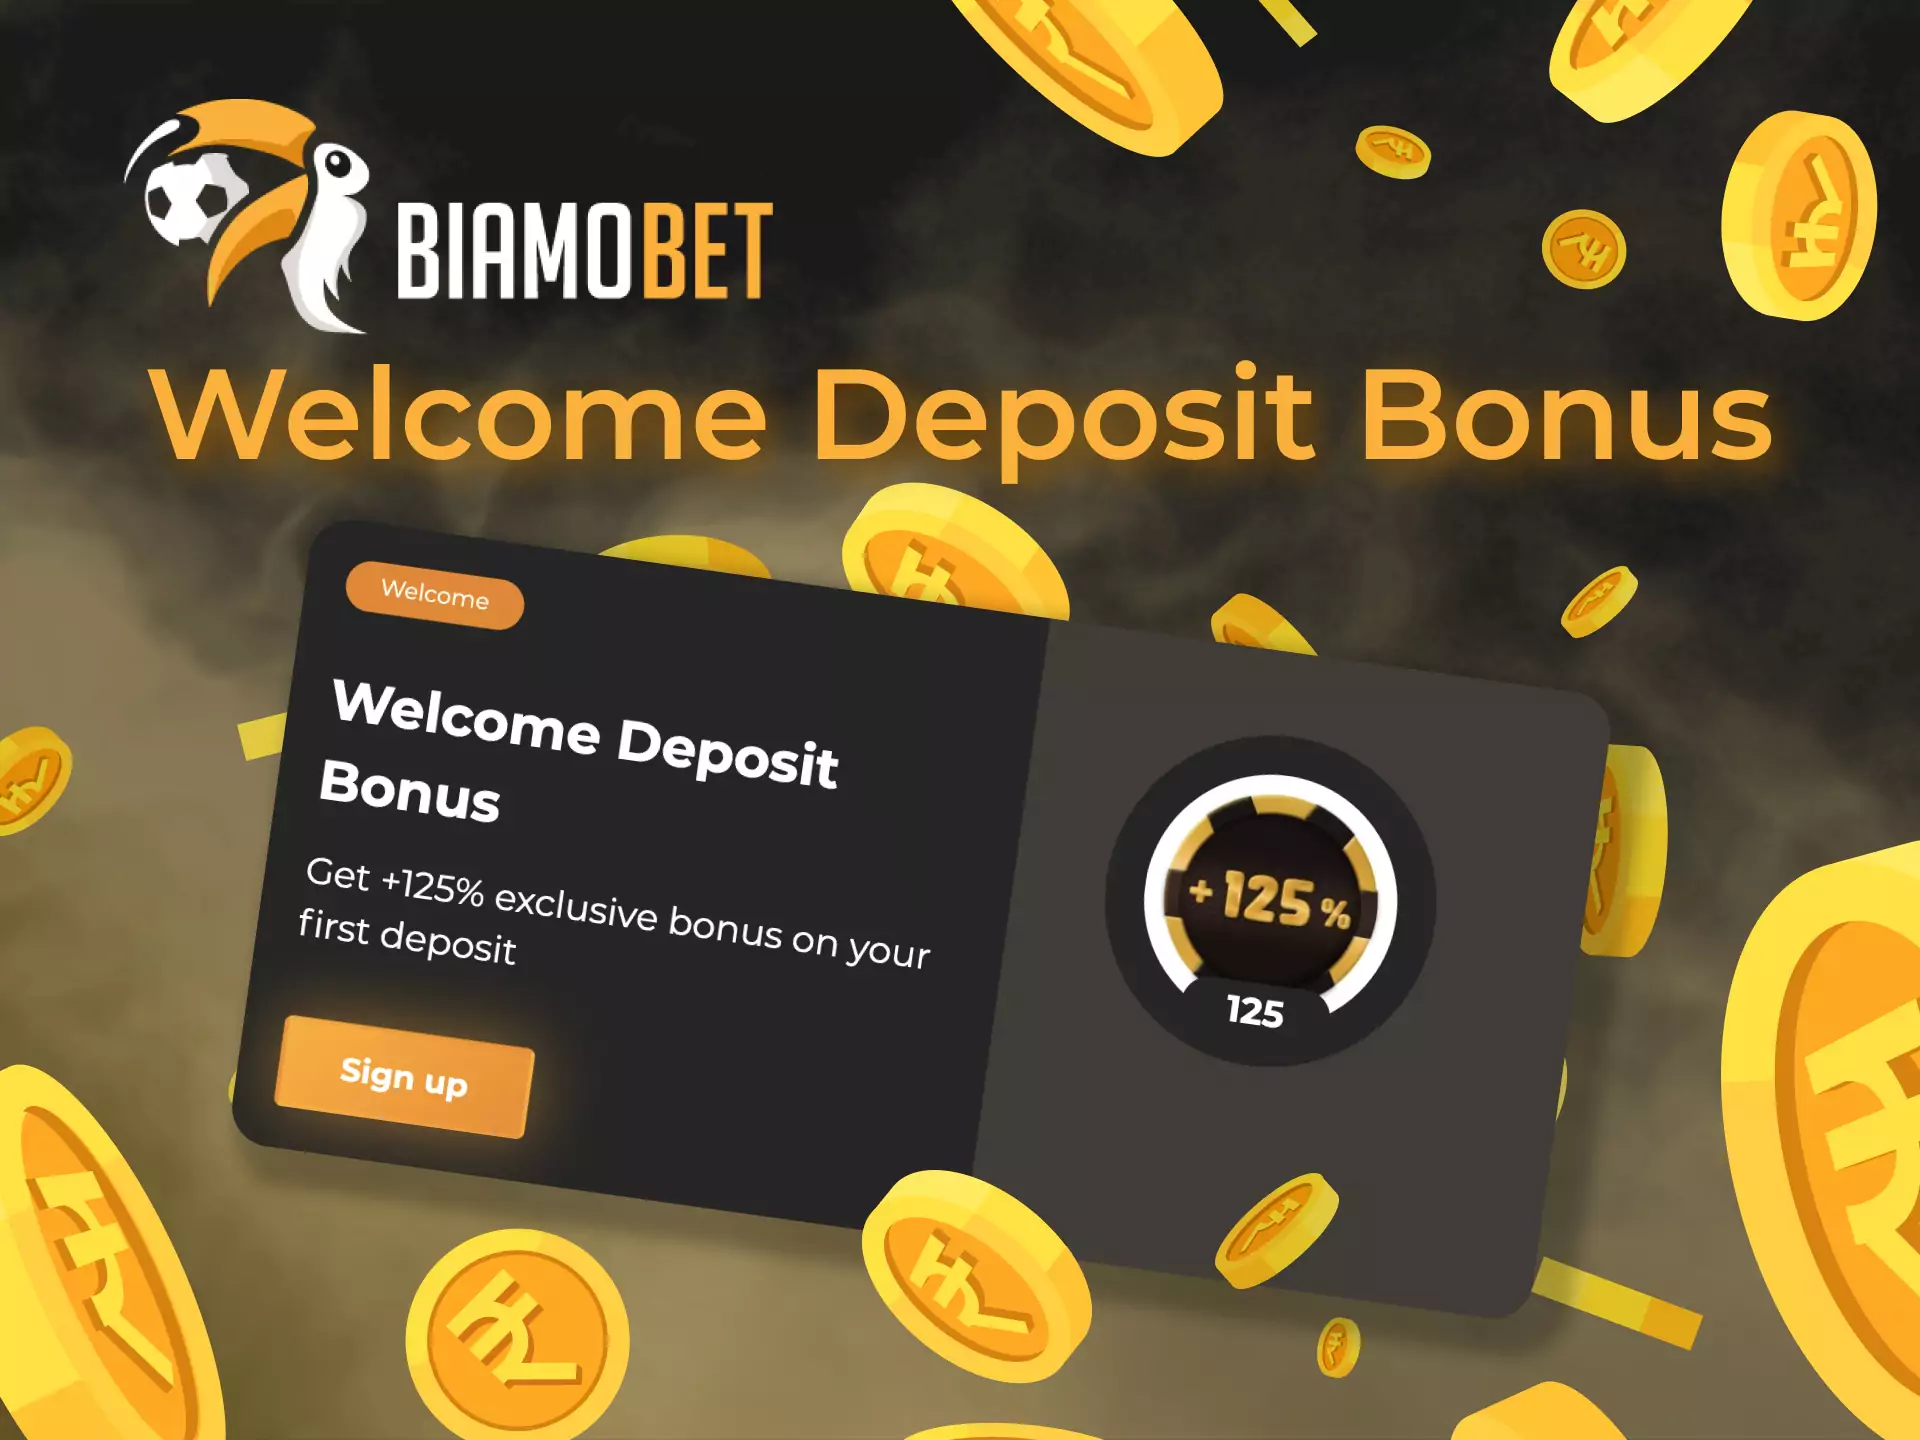 Newcomers get the Biamobet welcome deposit bonus of up to 125% of the amount.